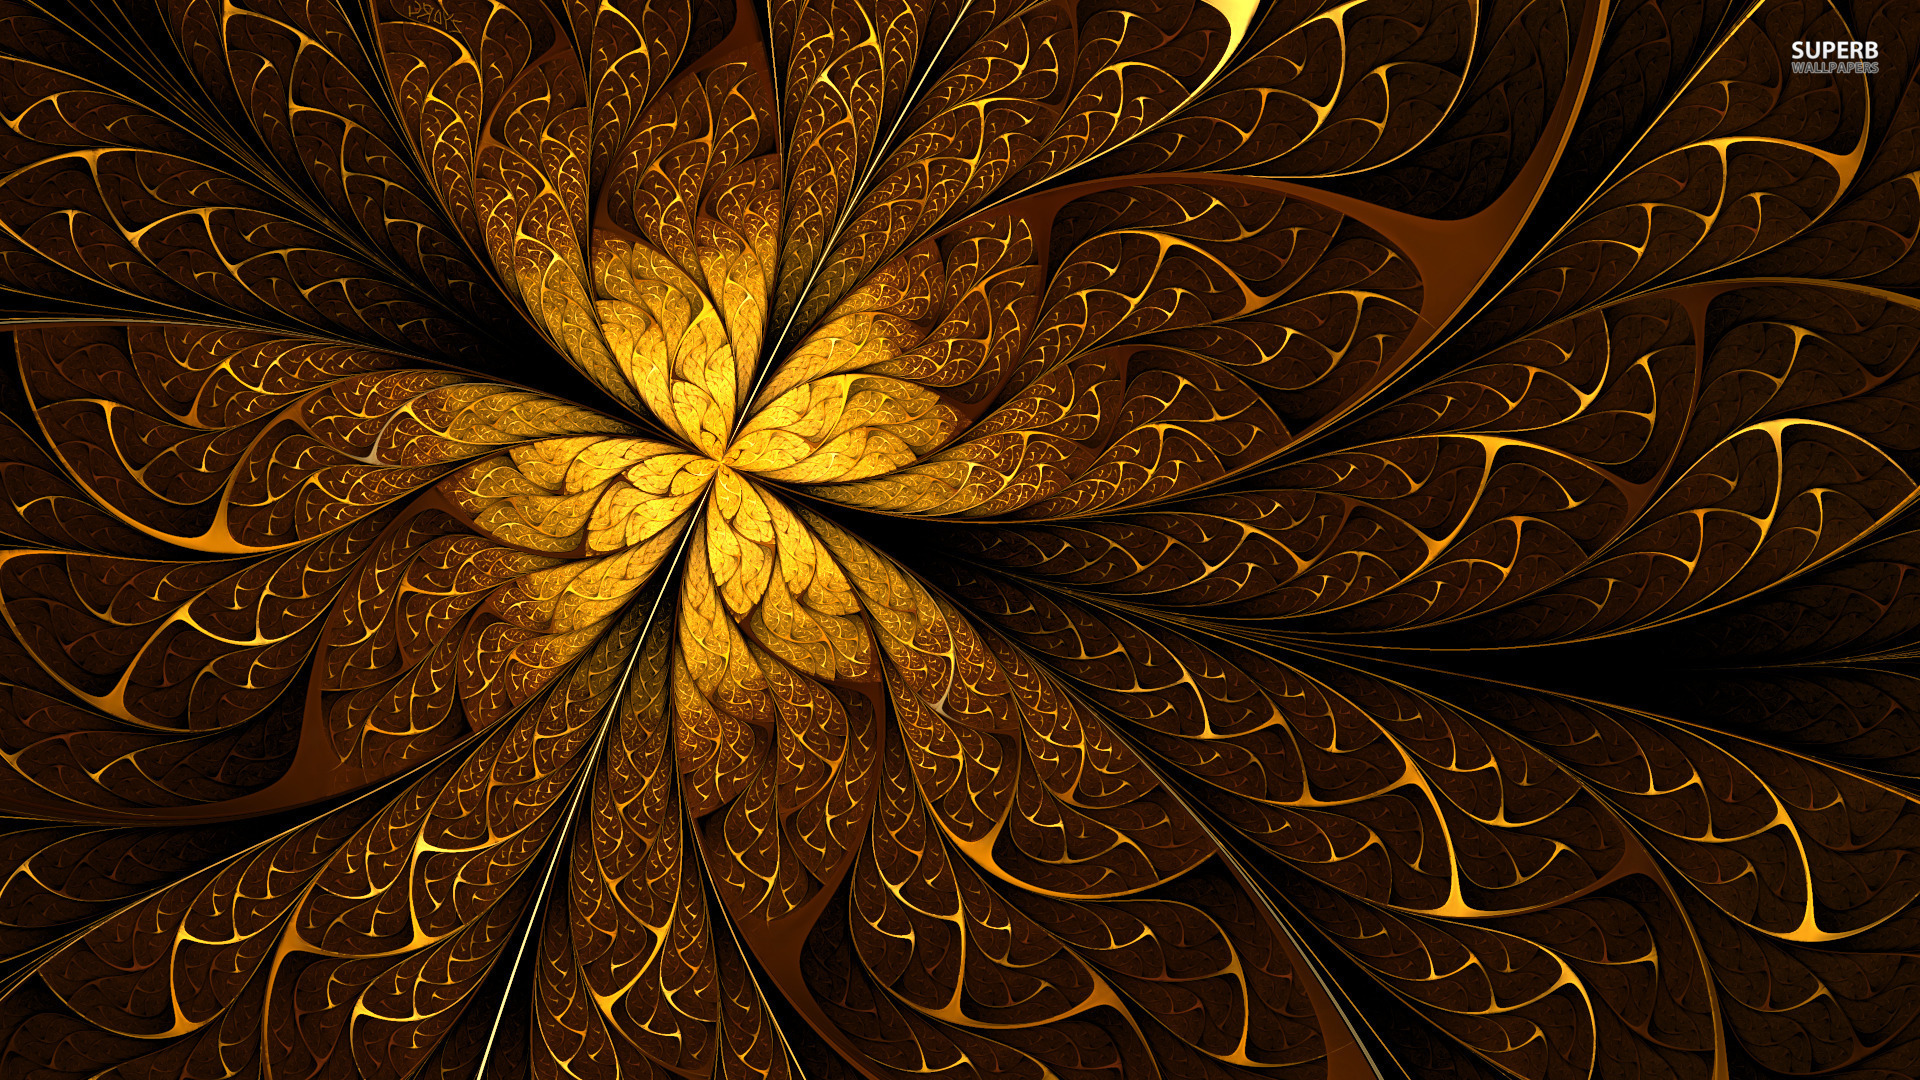 Abstract Swirls Windows 81 Theme And Wallpaper All For Windows 10